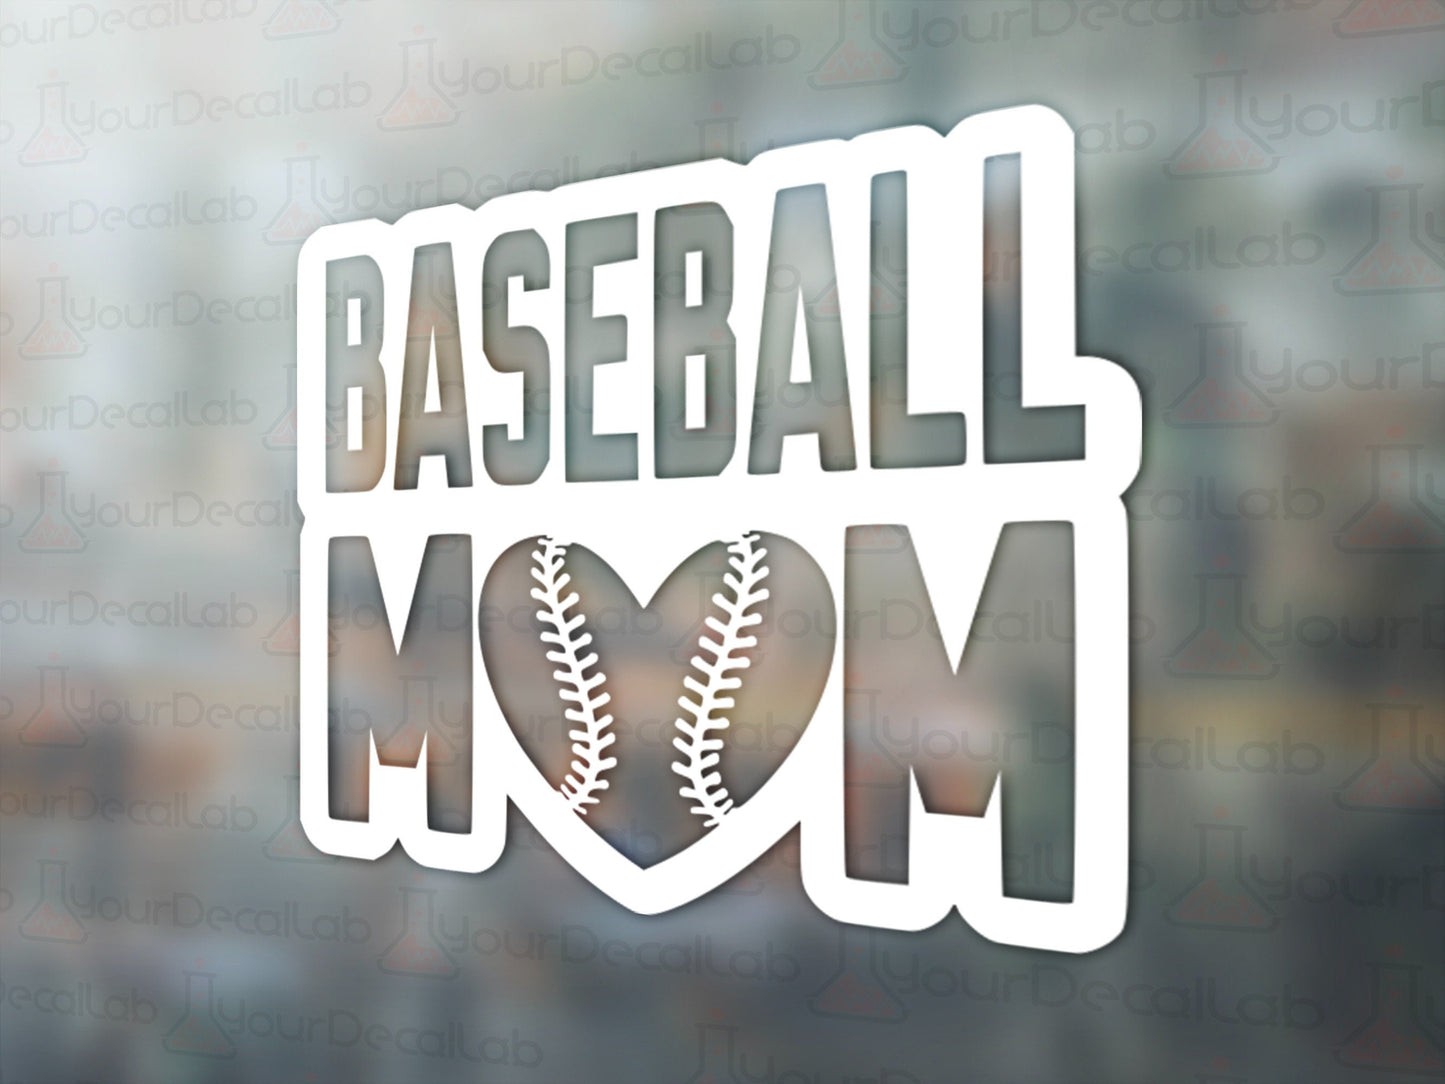 Baseball Mom Decal - Many Colors & Sizes